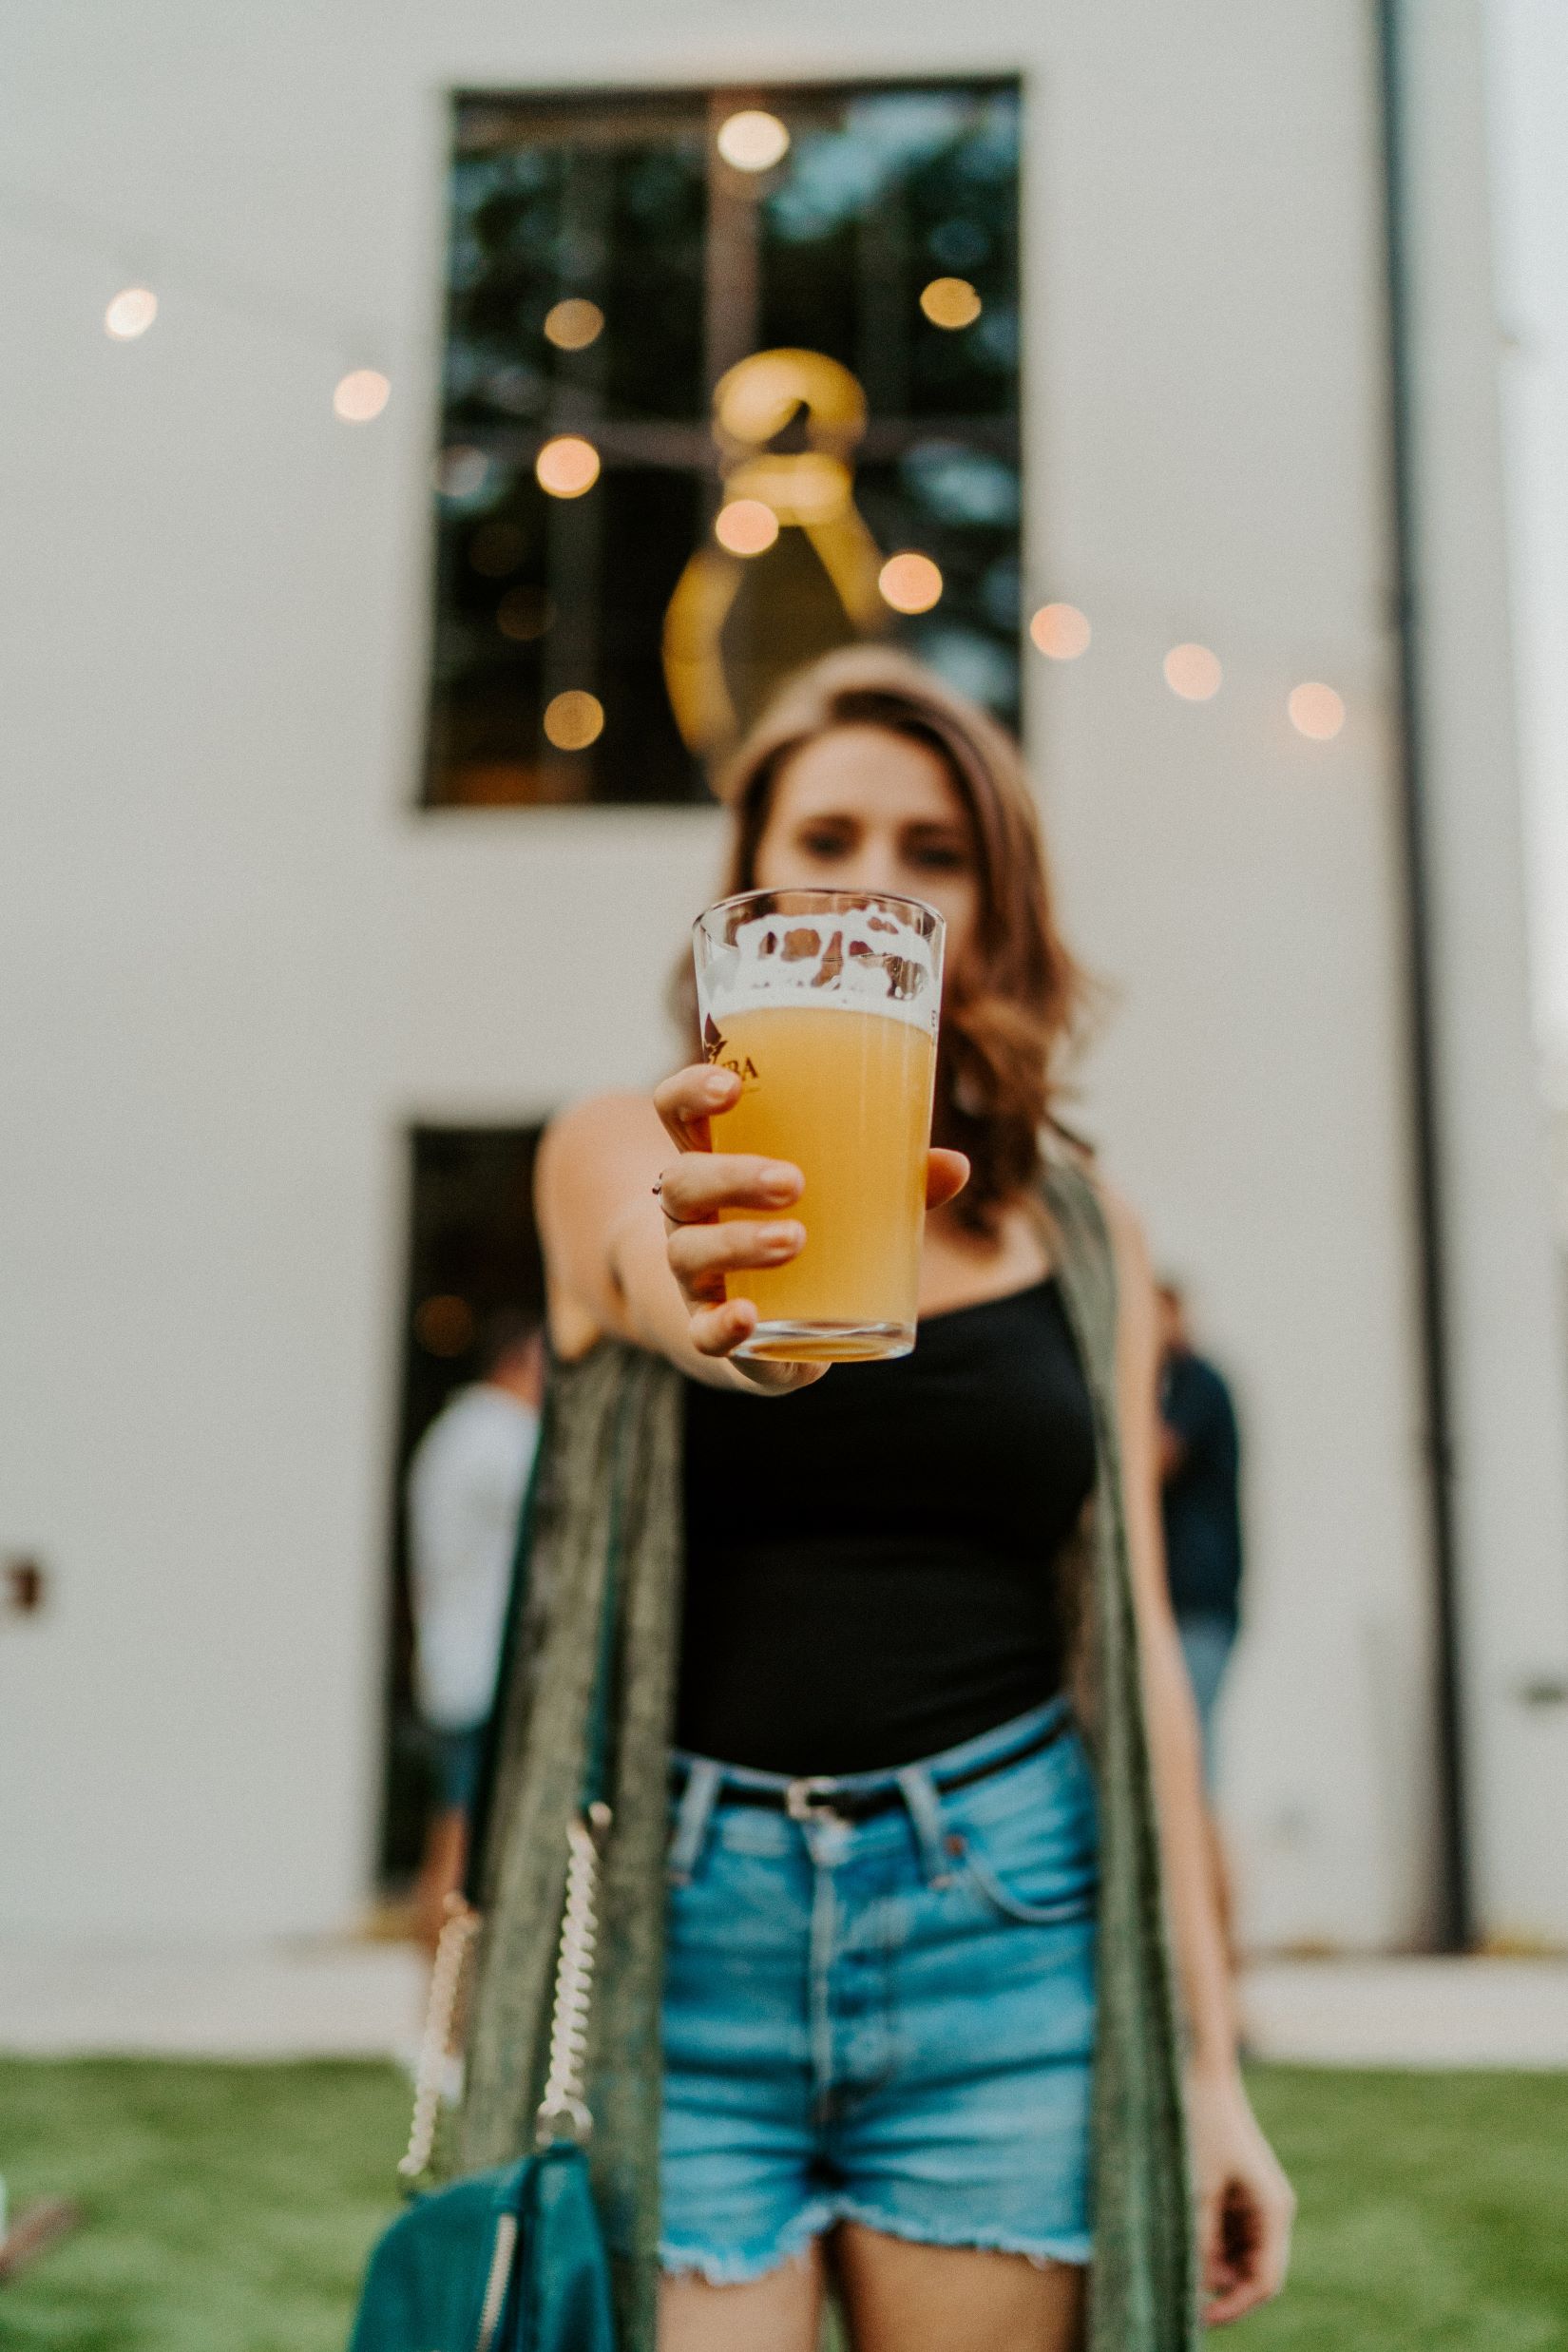 An image of a woman holding a beer.